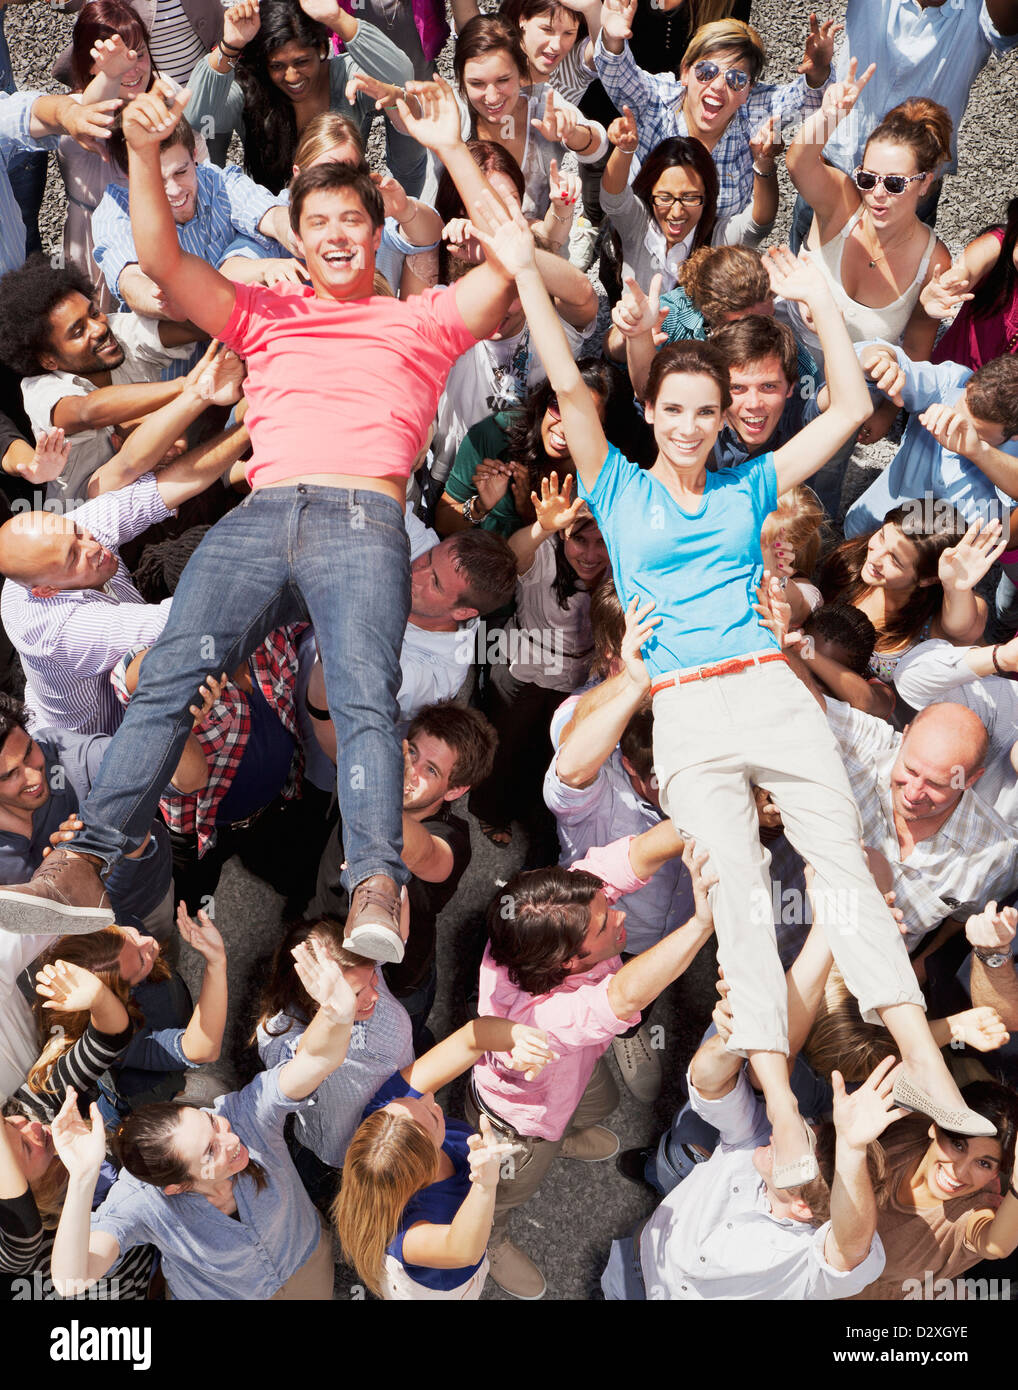 Portrait of man and woman crowd surfing Stock Photo